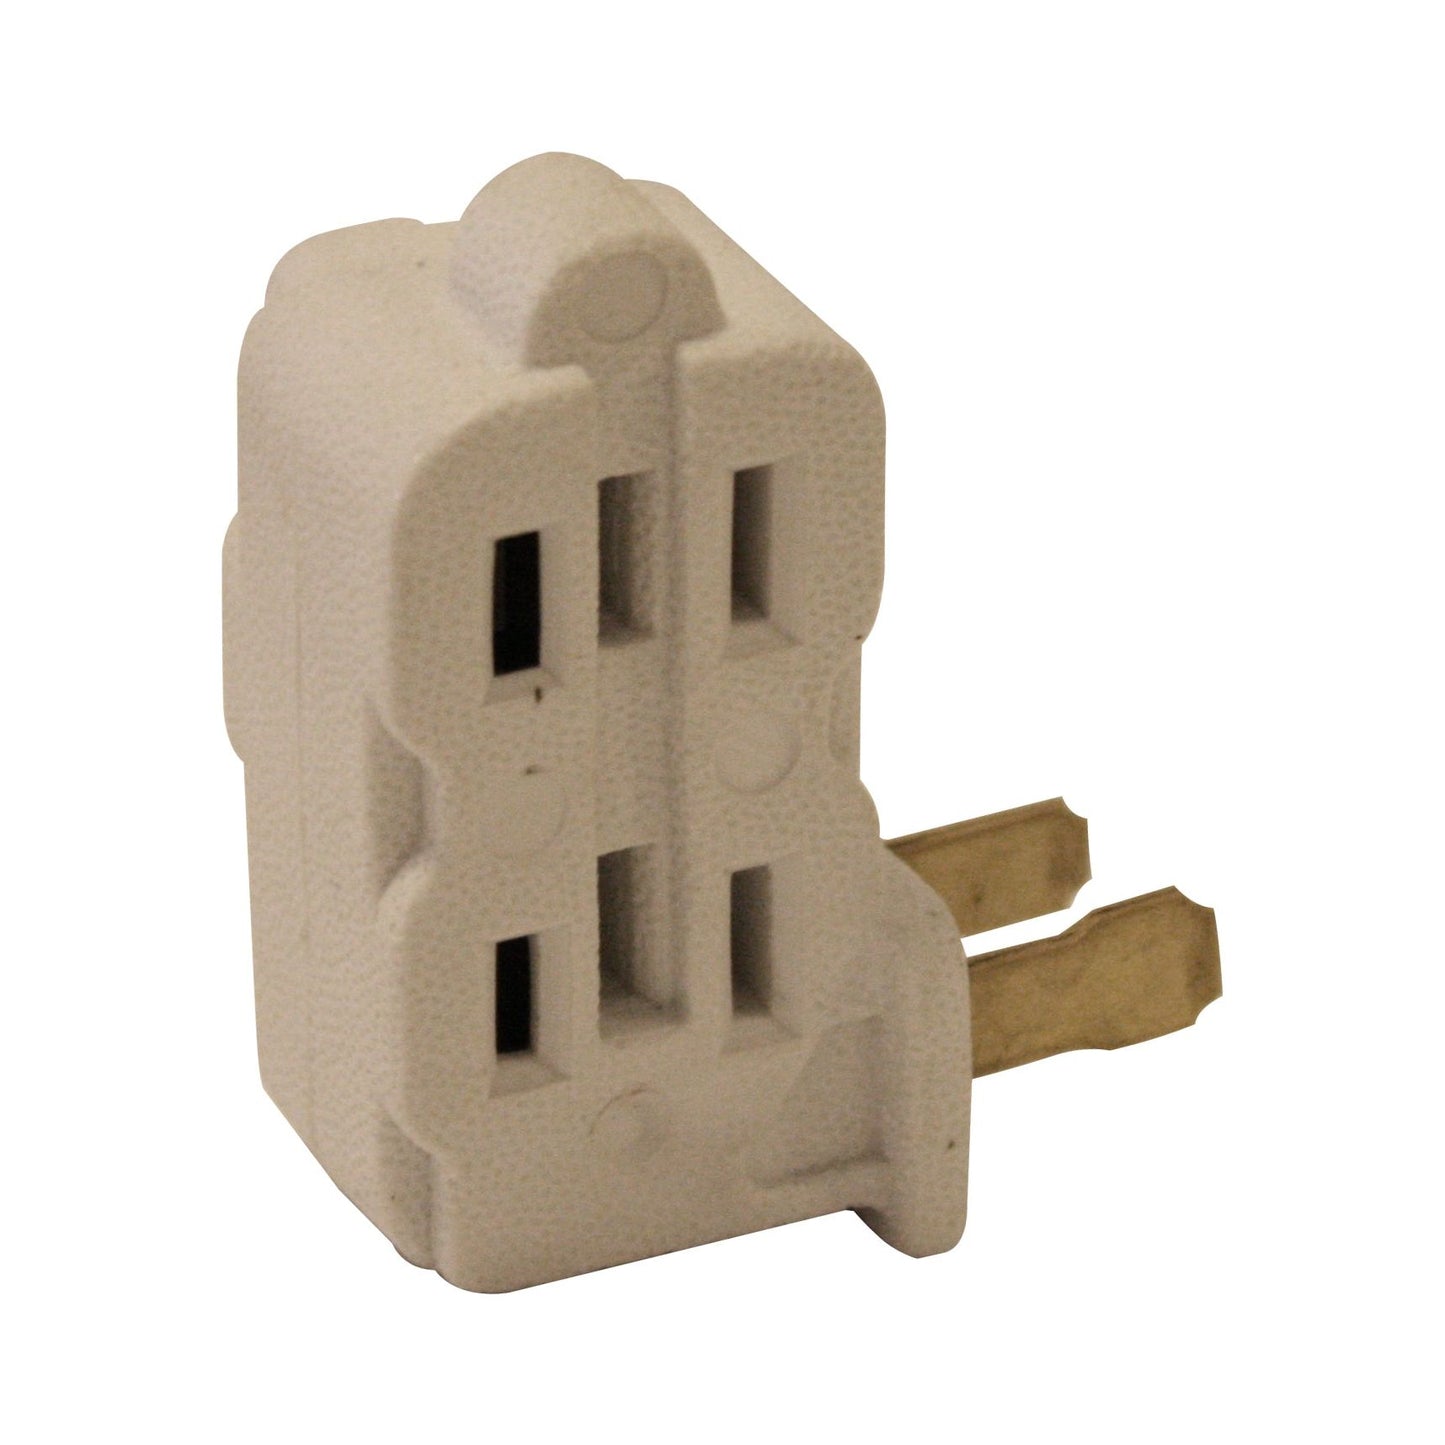 3 OUTLET WALL TAP NON GROUNDED